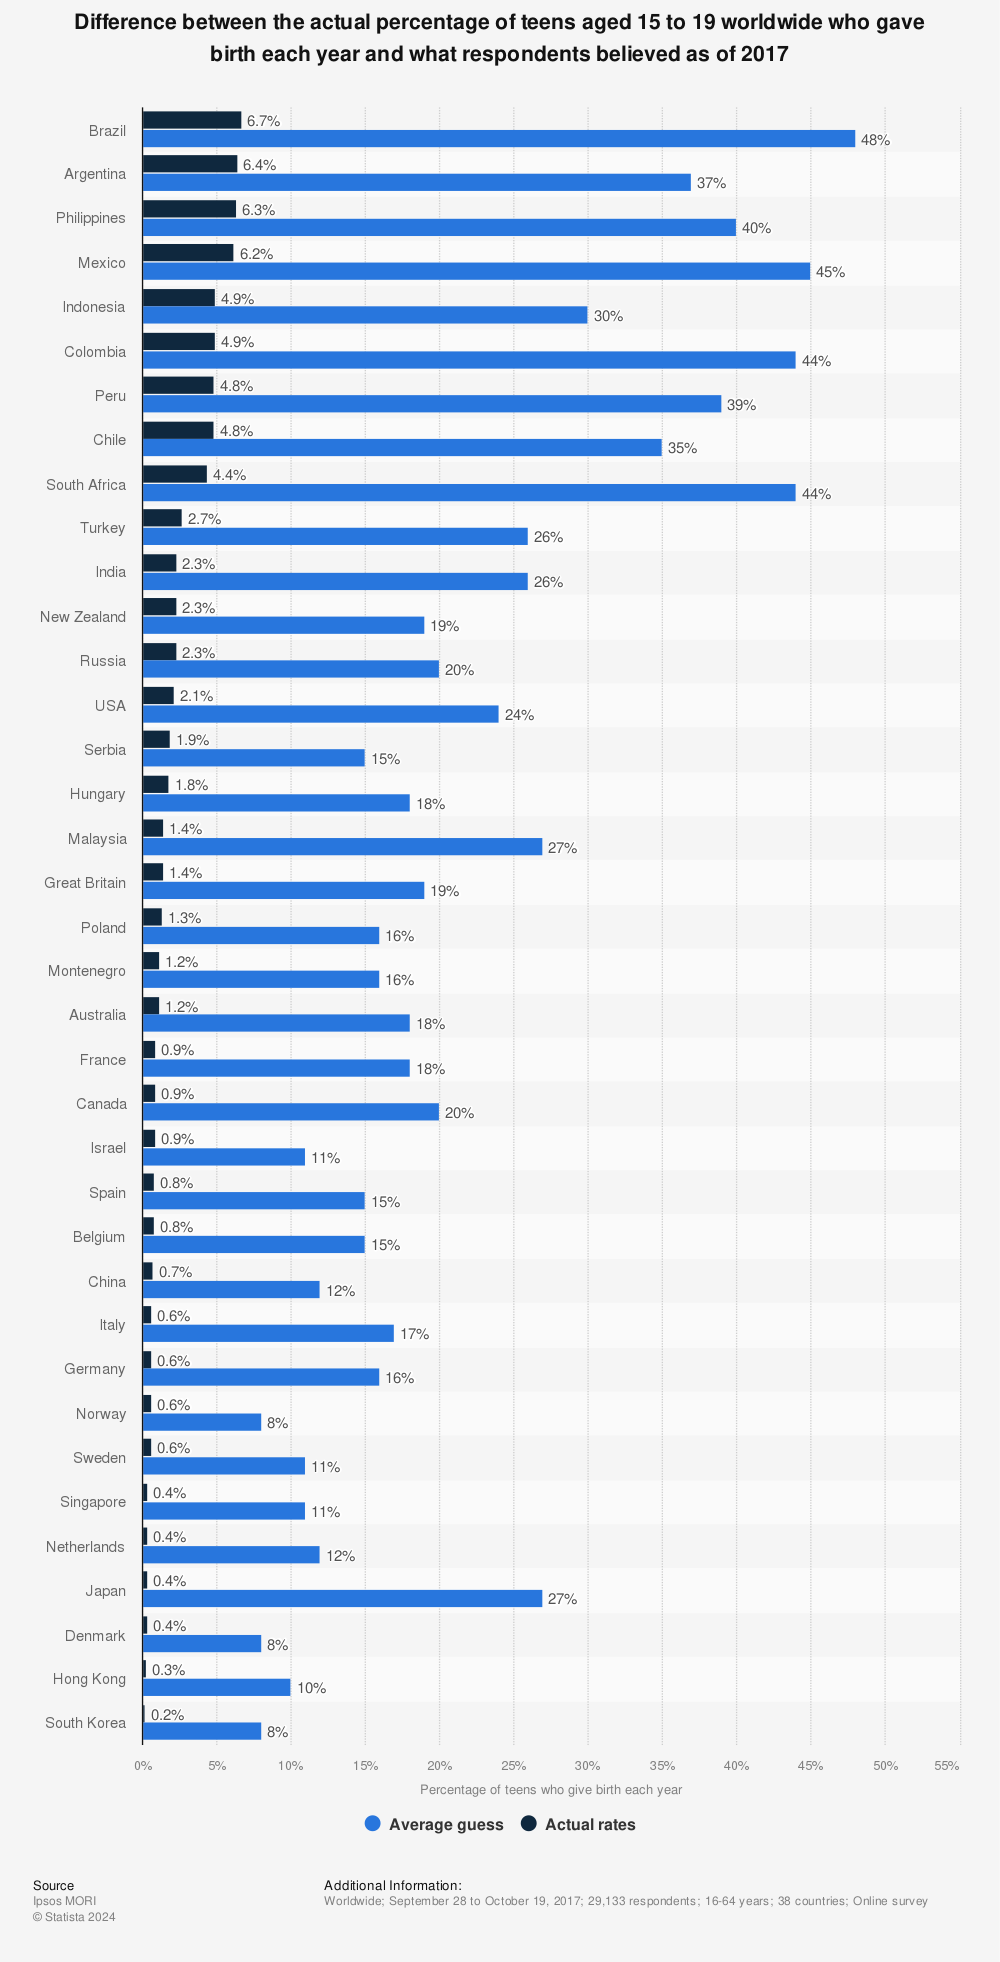 Statistic: Difference between the actual percentage of teens aged 15 to 19 worldwide who gave birth each year and what respondents believed as of 2017 | Statista